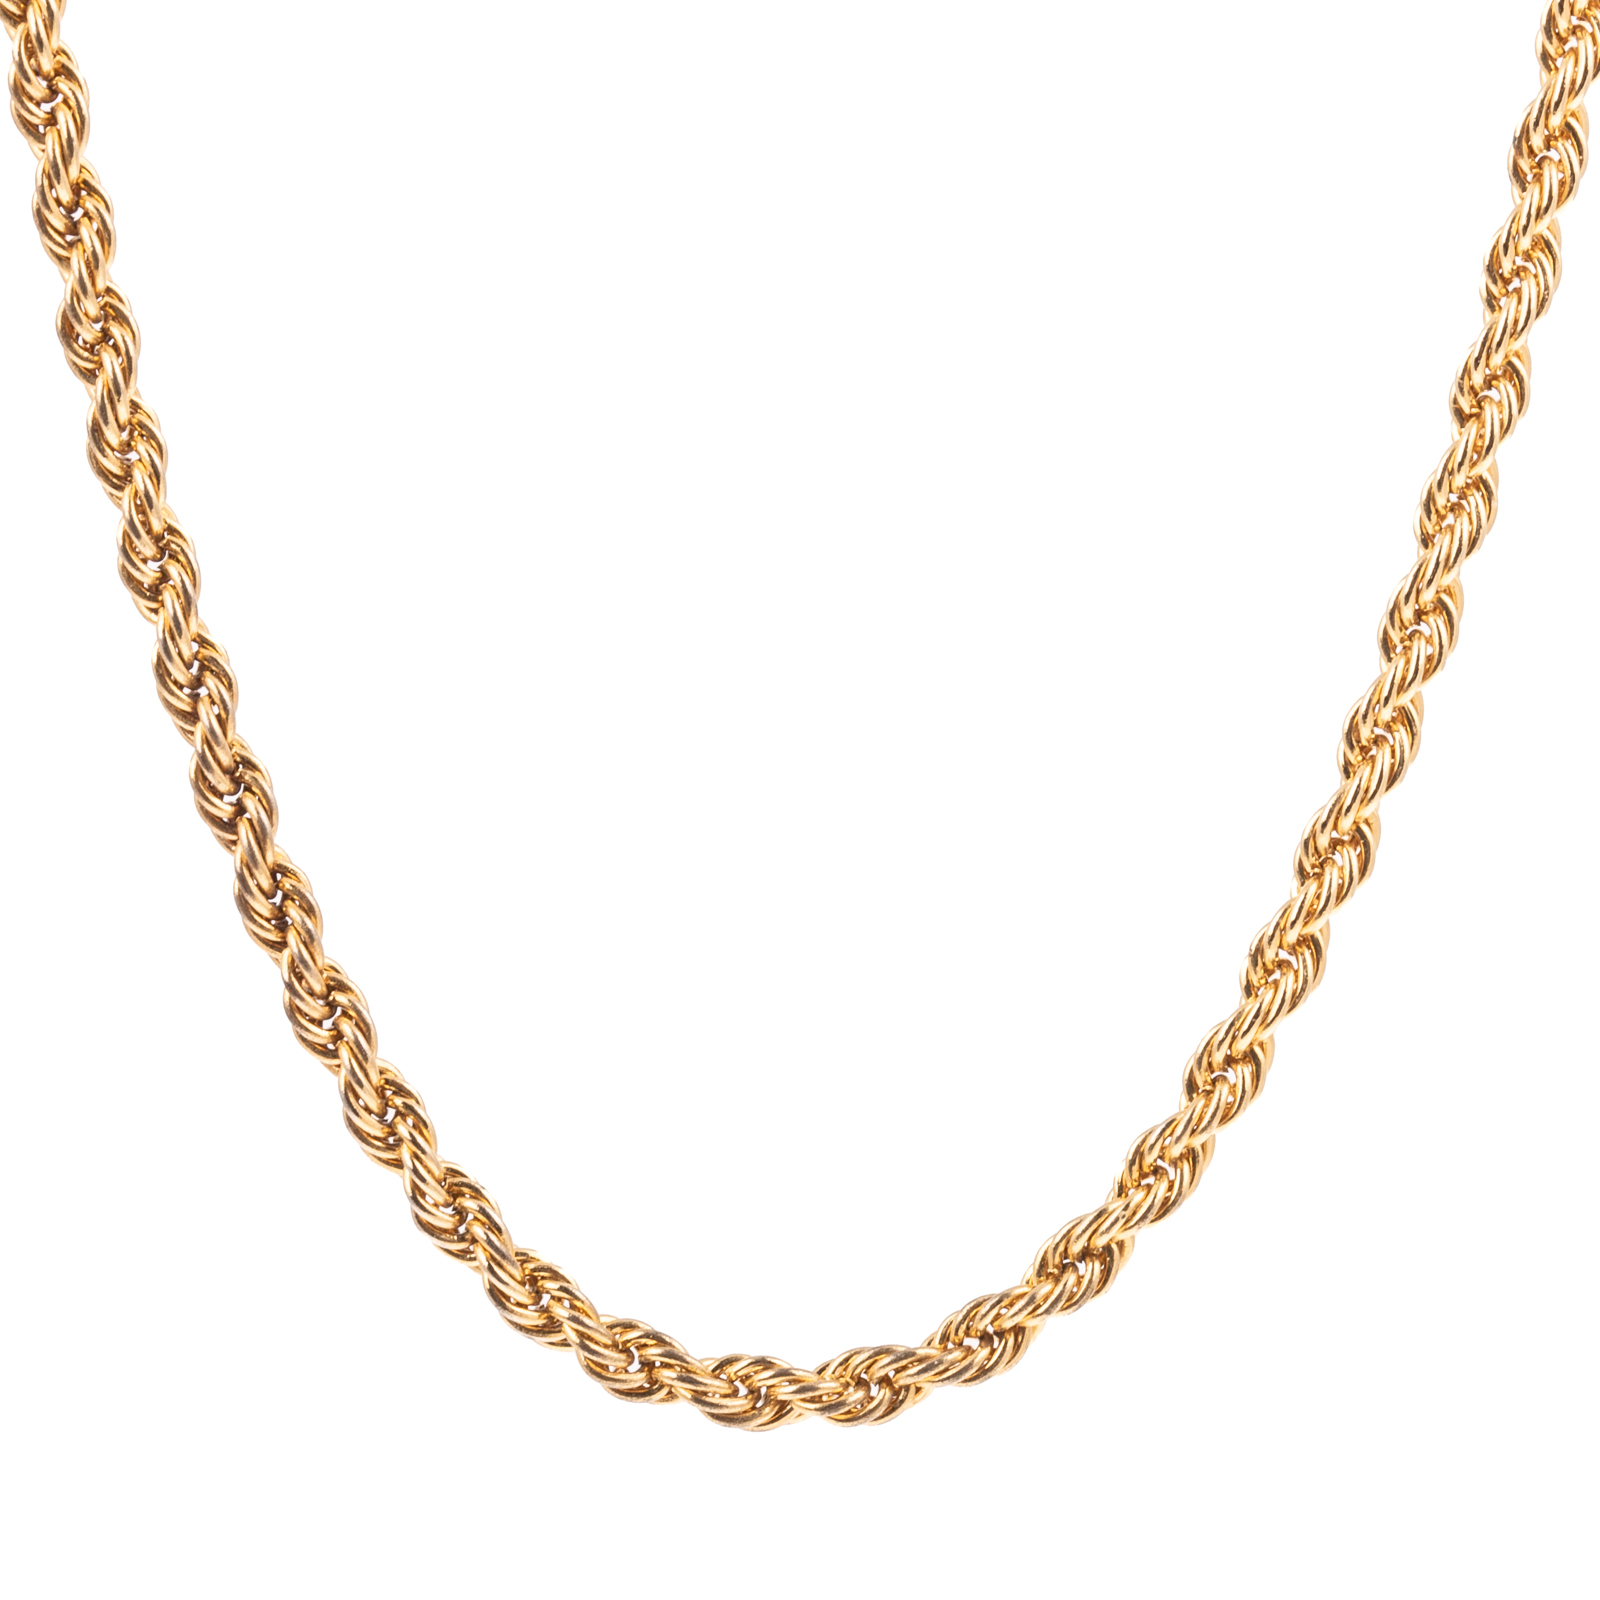 A ROPE CHAIN NECKLACE IN 14K 14K